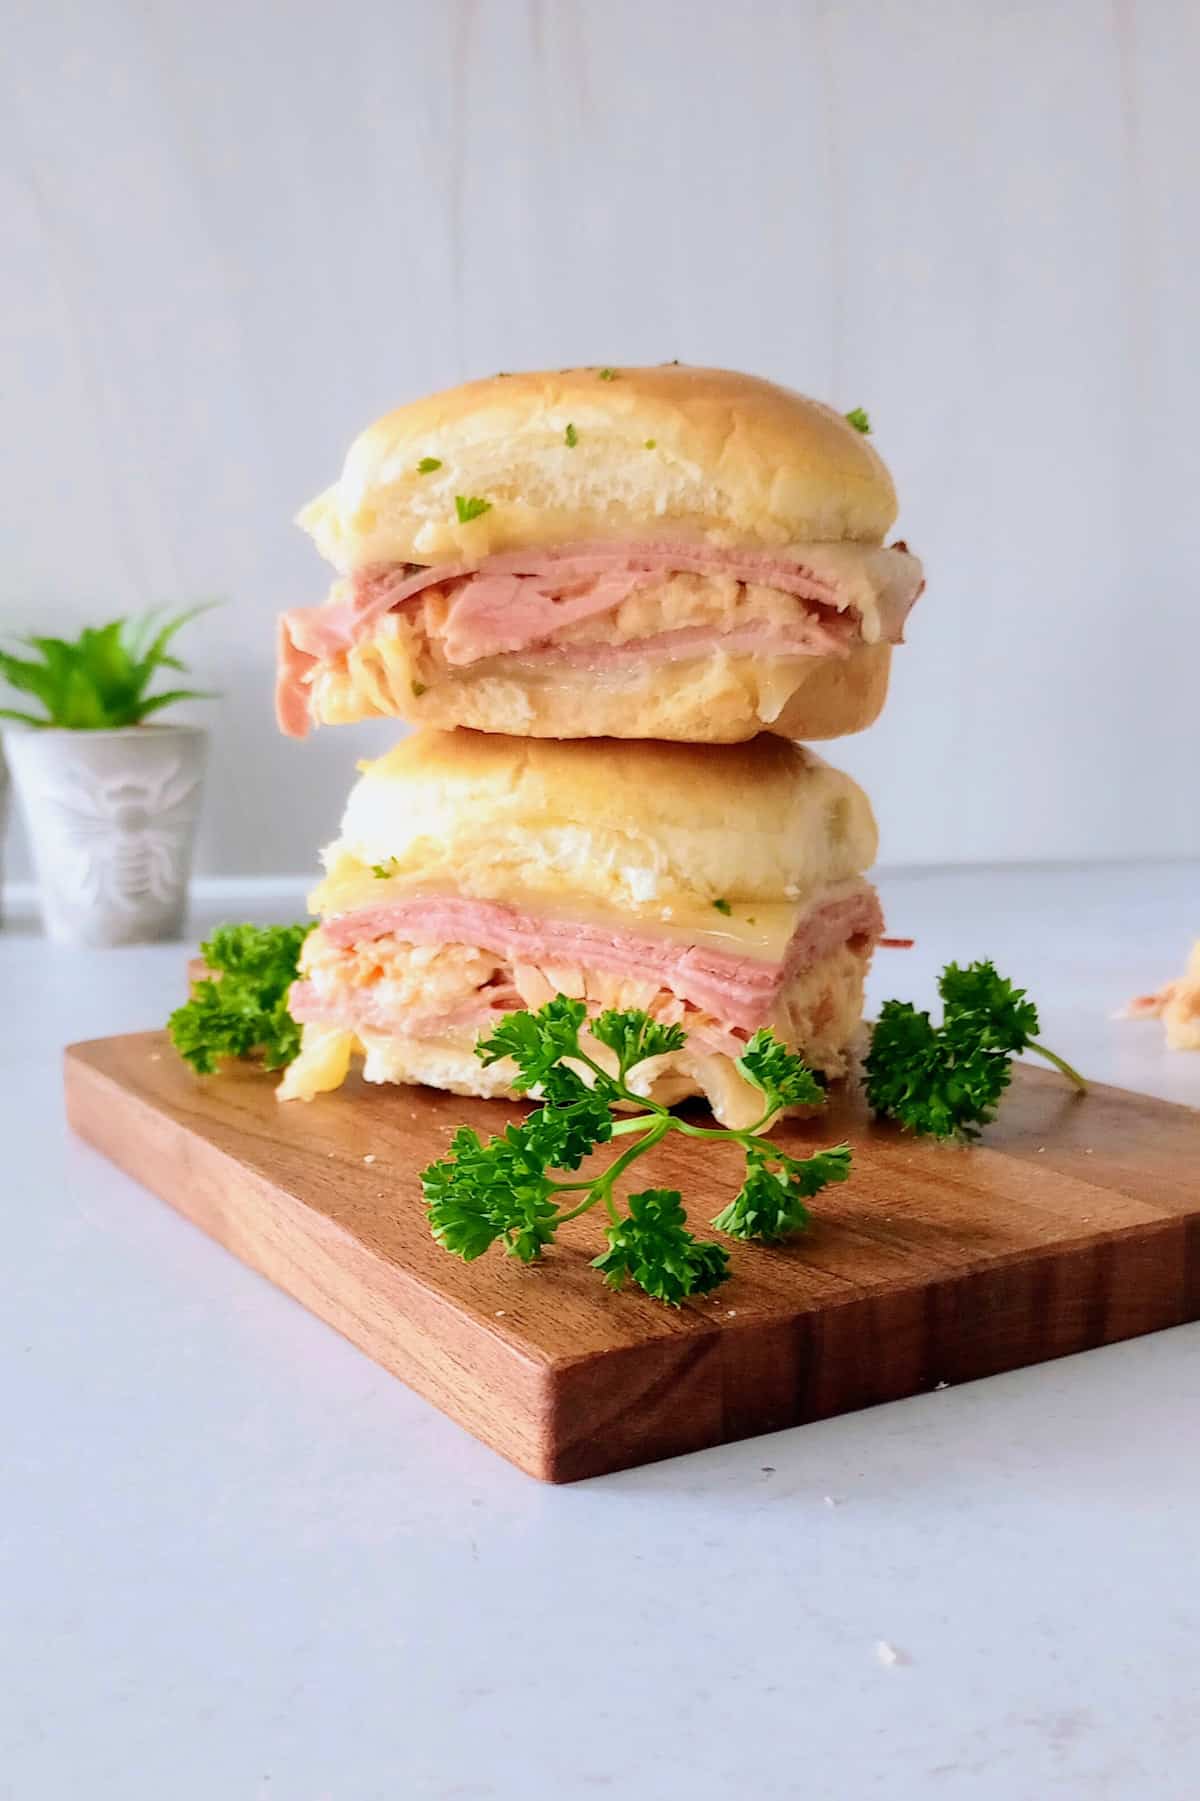 Baked Reuben sliders fresh out of the oven. Stacked on top of each other on a dark brown cutting board next to fresh parsley.